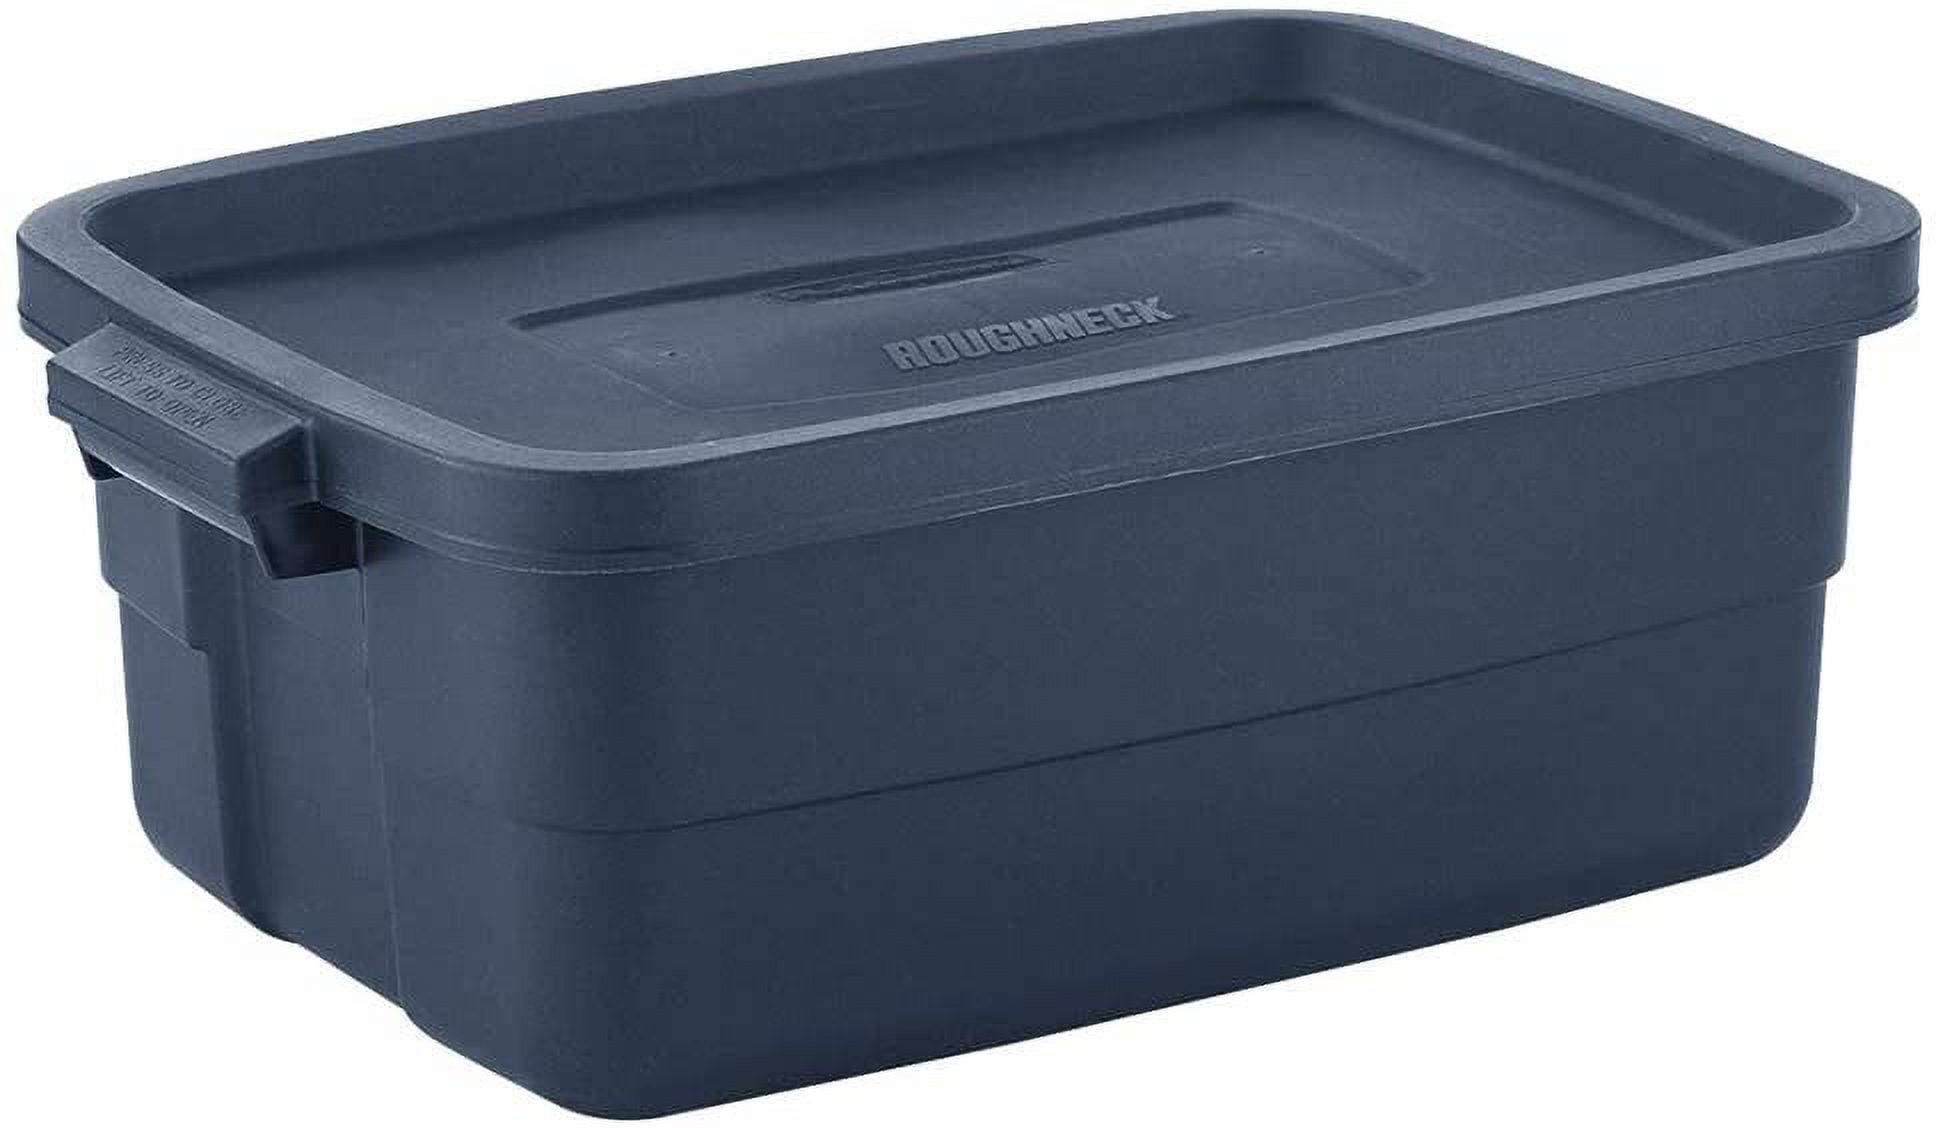  CX Rugged Tote, 10-Gallon Rugged Storage Container & Standard  Snap Lid, (8.8”H x 24.2”W x 16.2”D), Stackable Organization Tote [4 Pack]